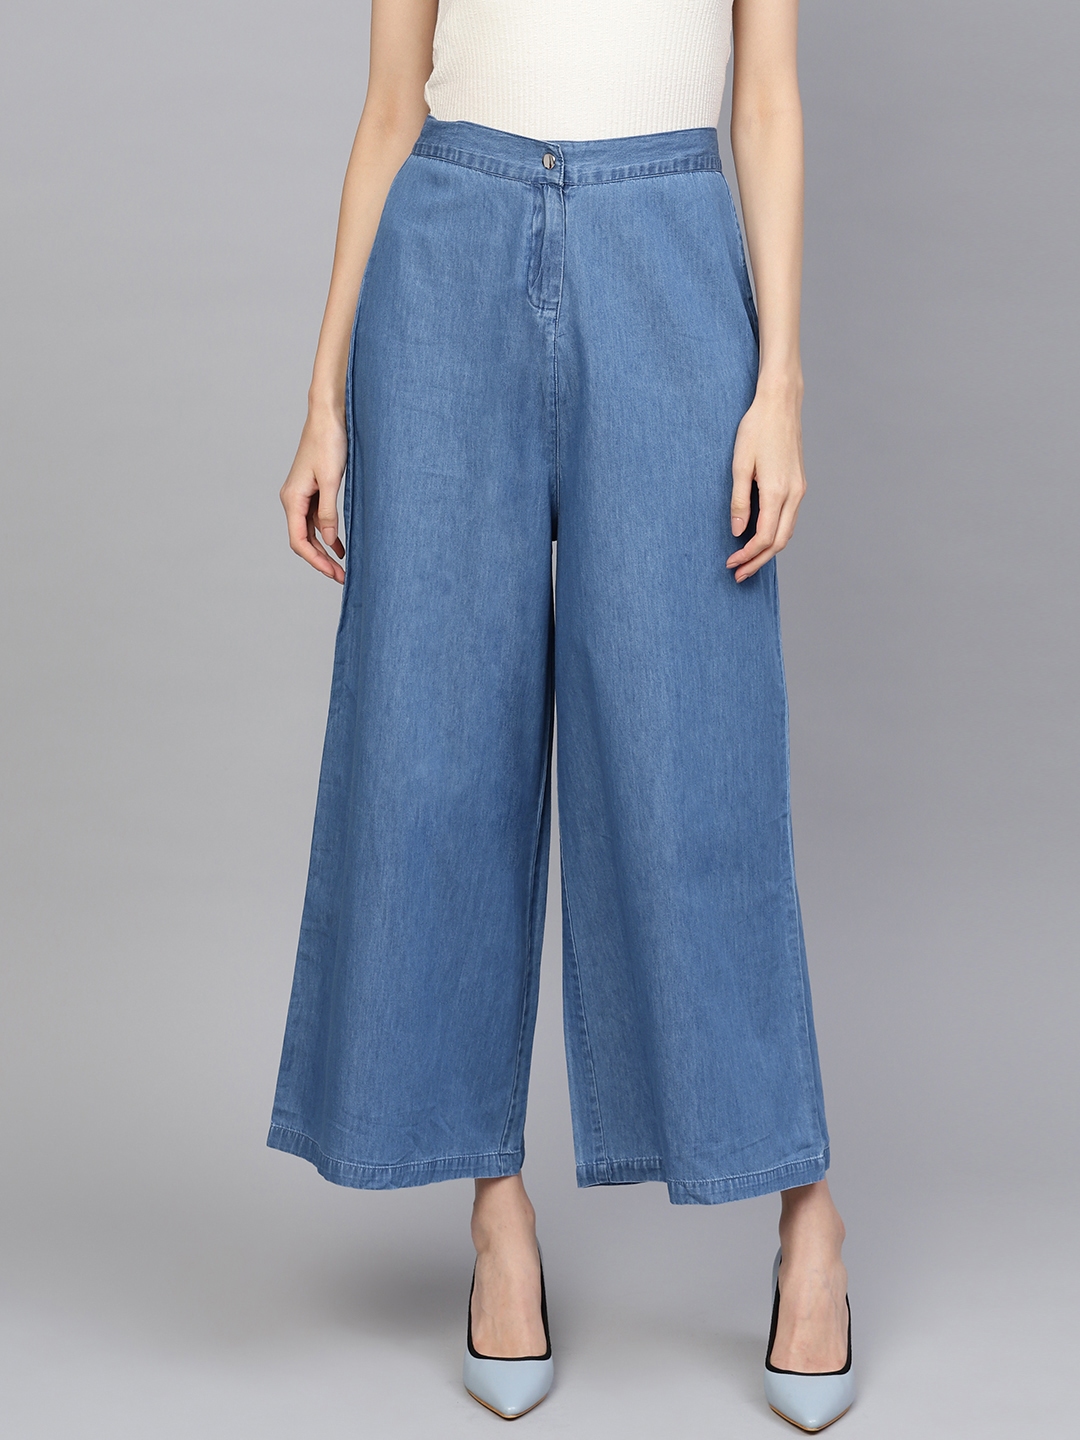 high waist jeans trousers for ladies